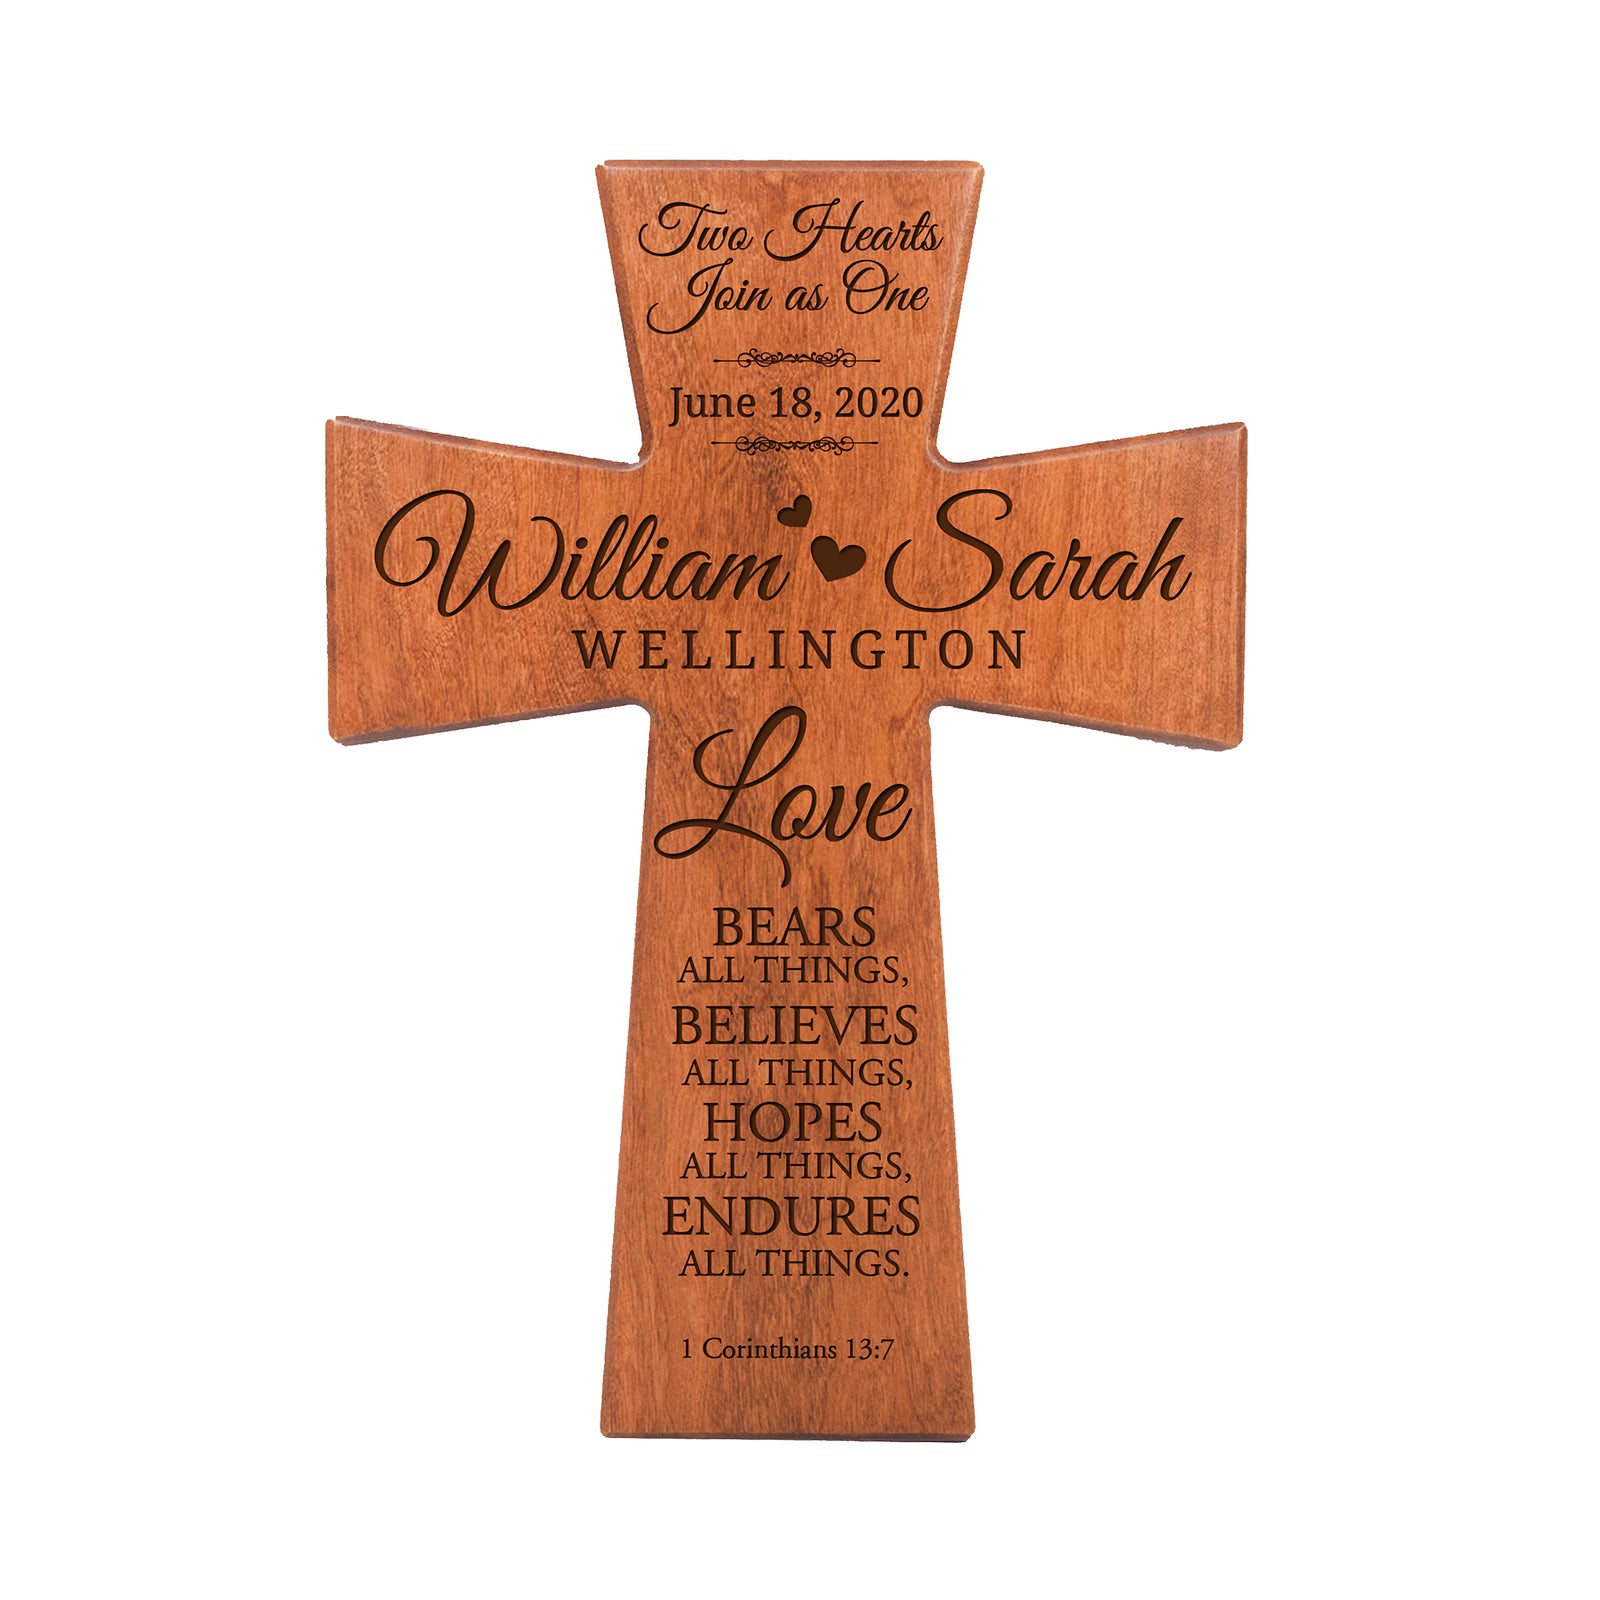 Personalized Wedding Anniversary Hanging Wall Cross – Two Hearts Join